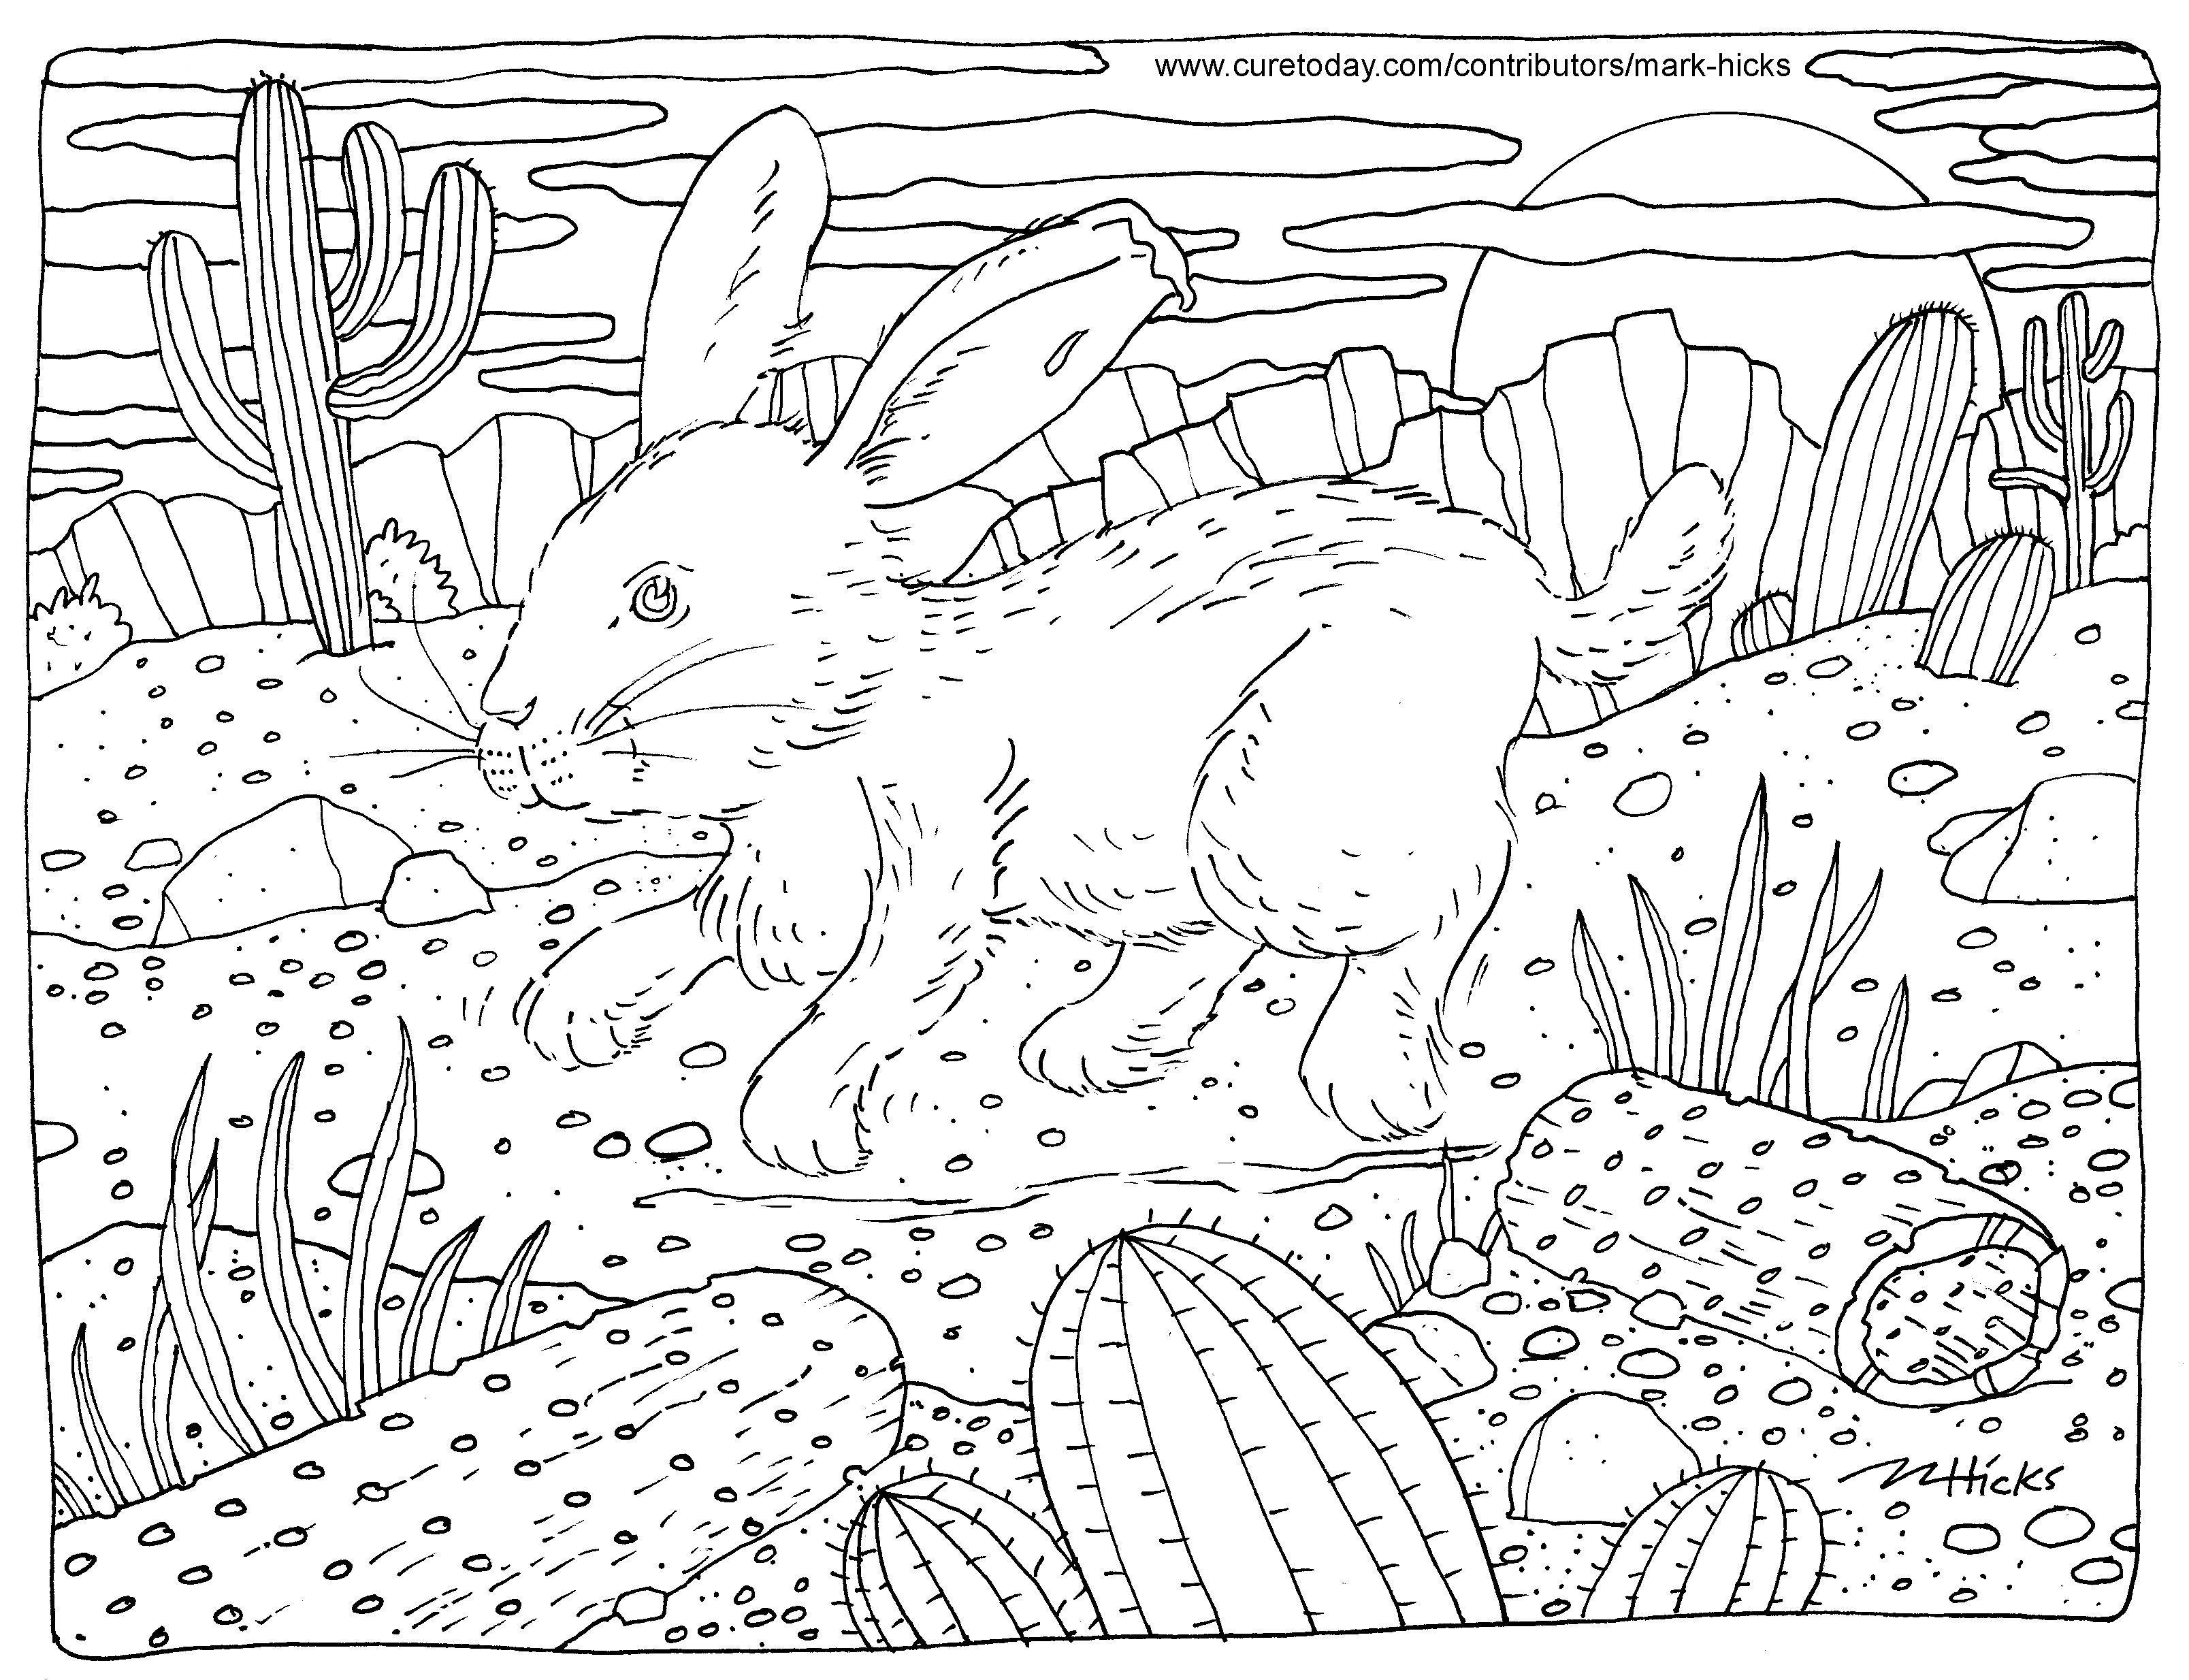 Year of the rabbit coloring page by Mark Hicks